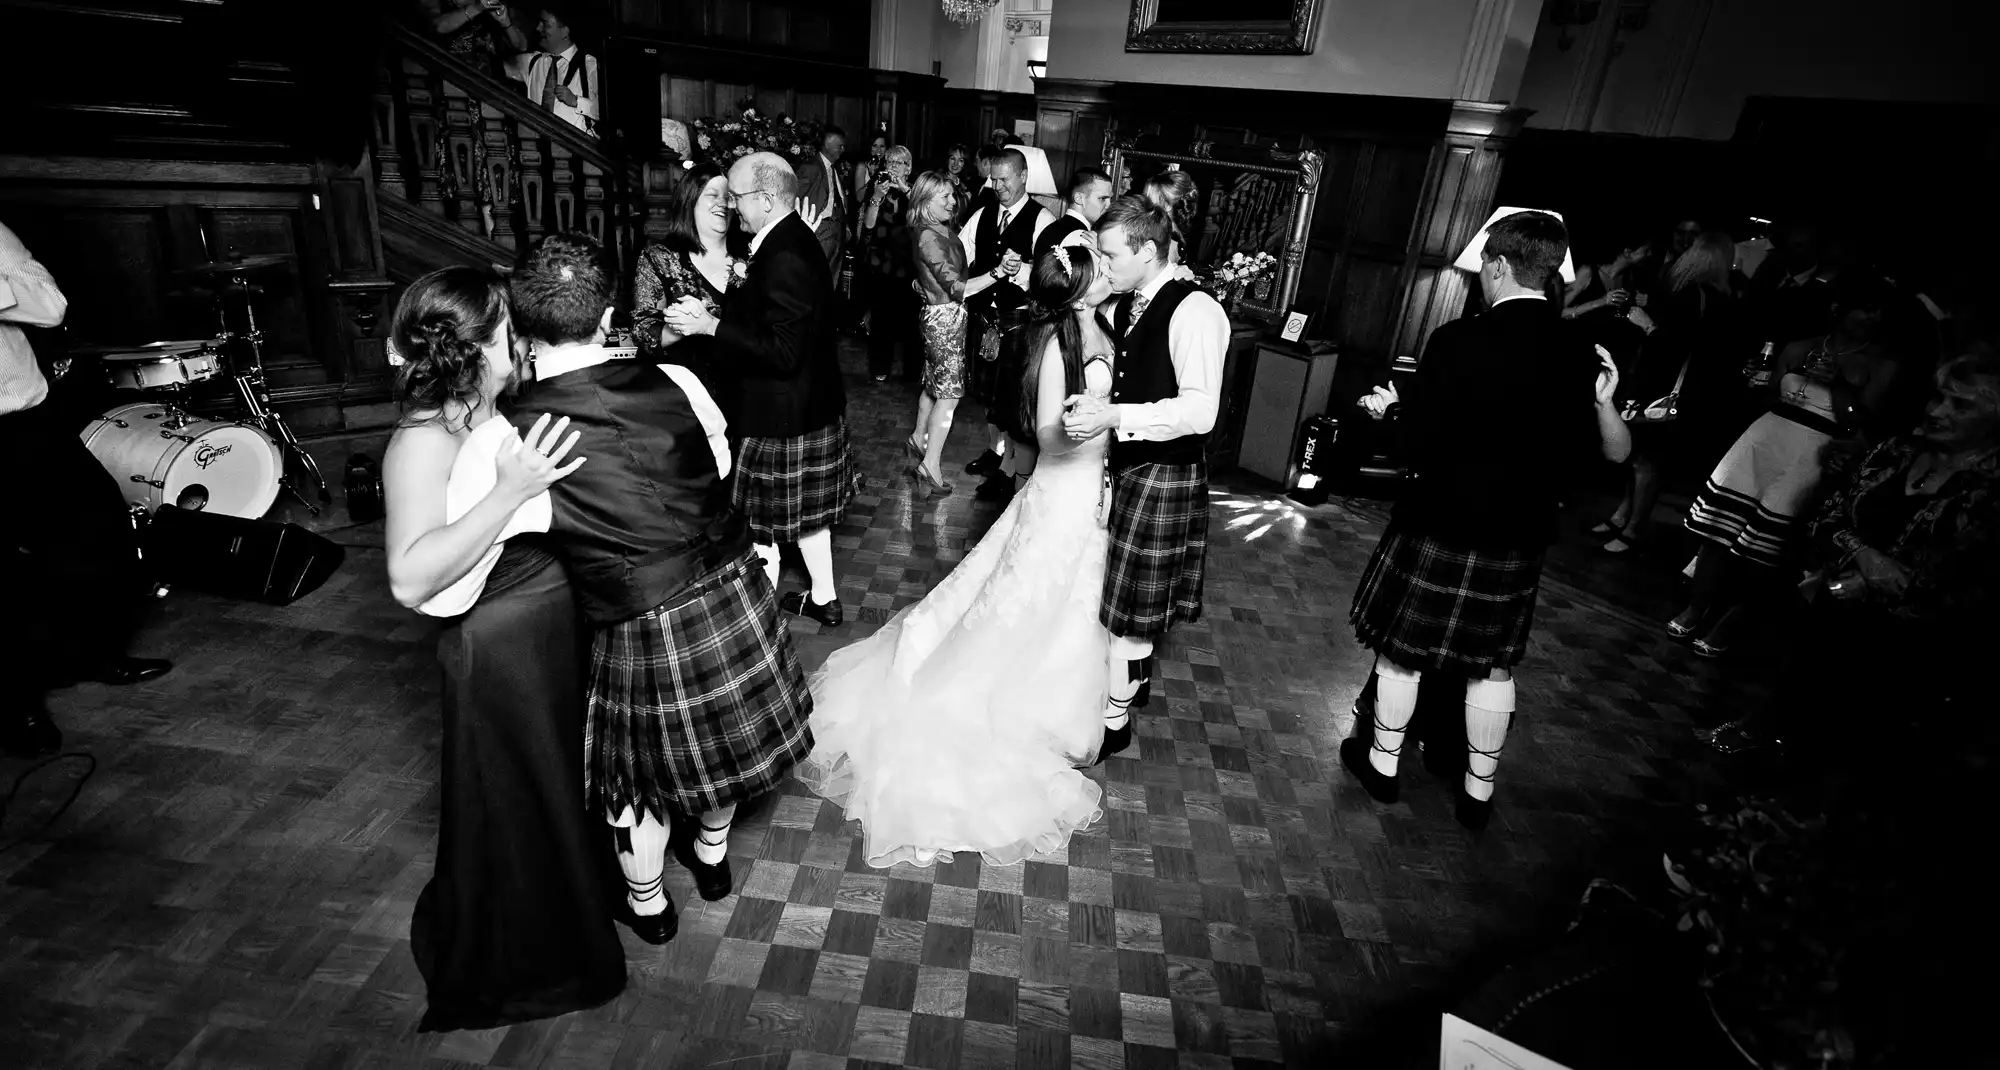 A black and white photograph of a wedding reception with guests wearing kilts dancing in a hall.